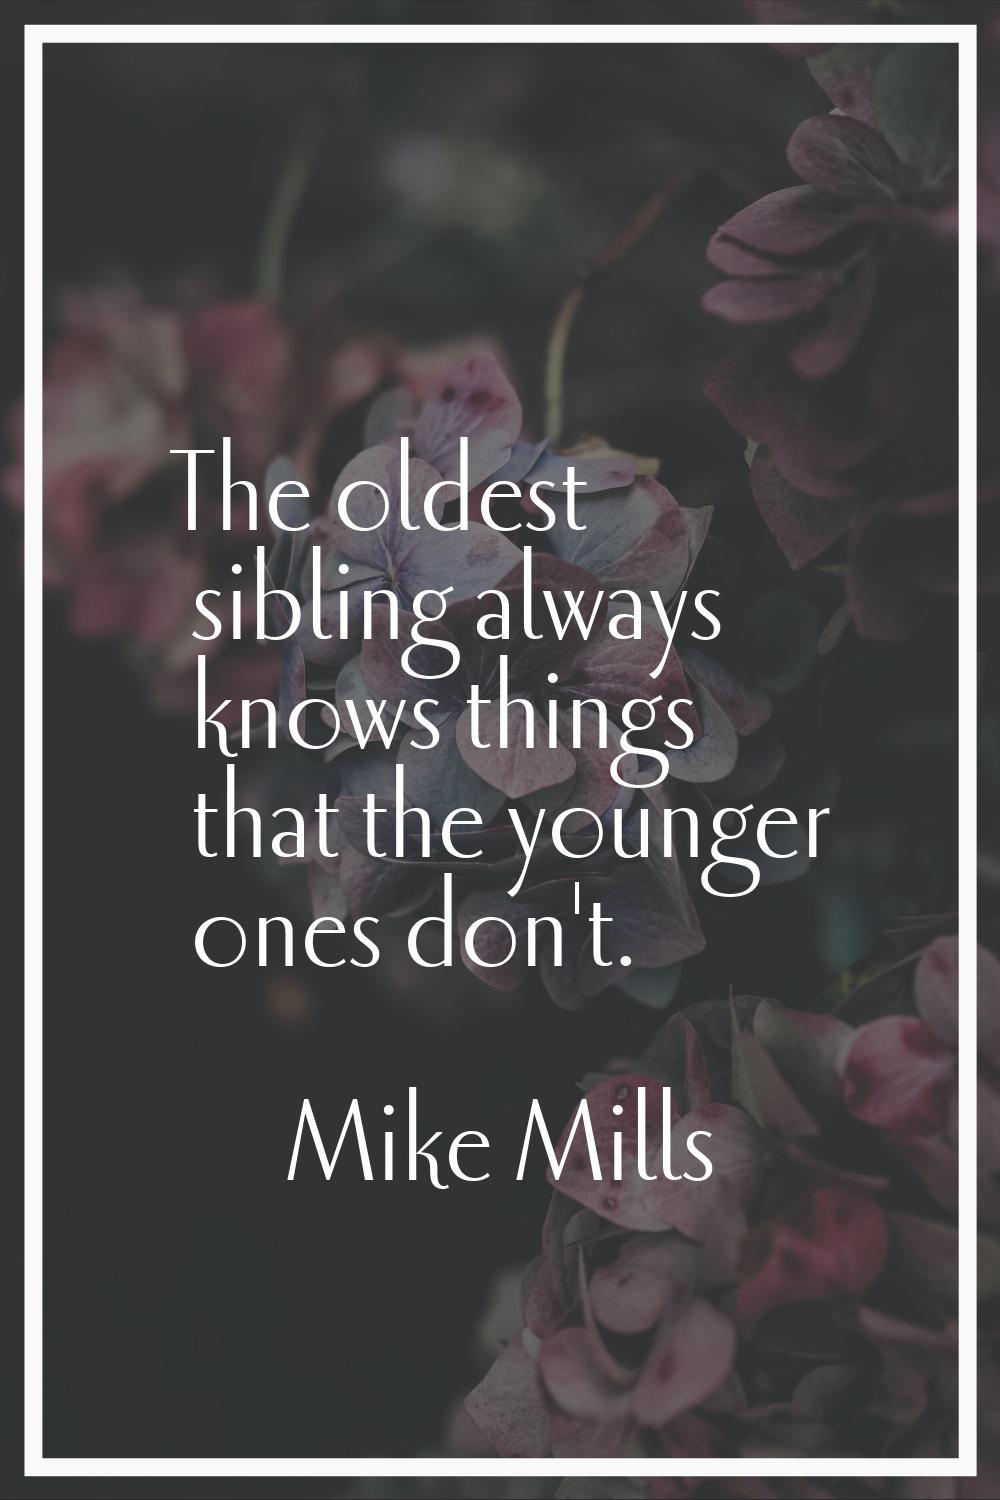 The oldest sibling always knows things that the younger ones don't.